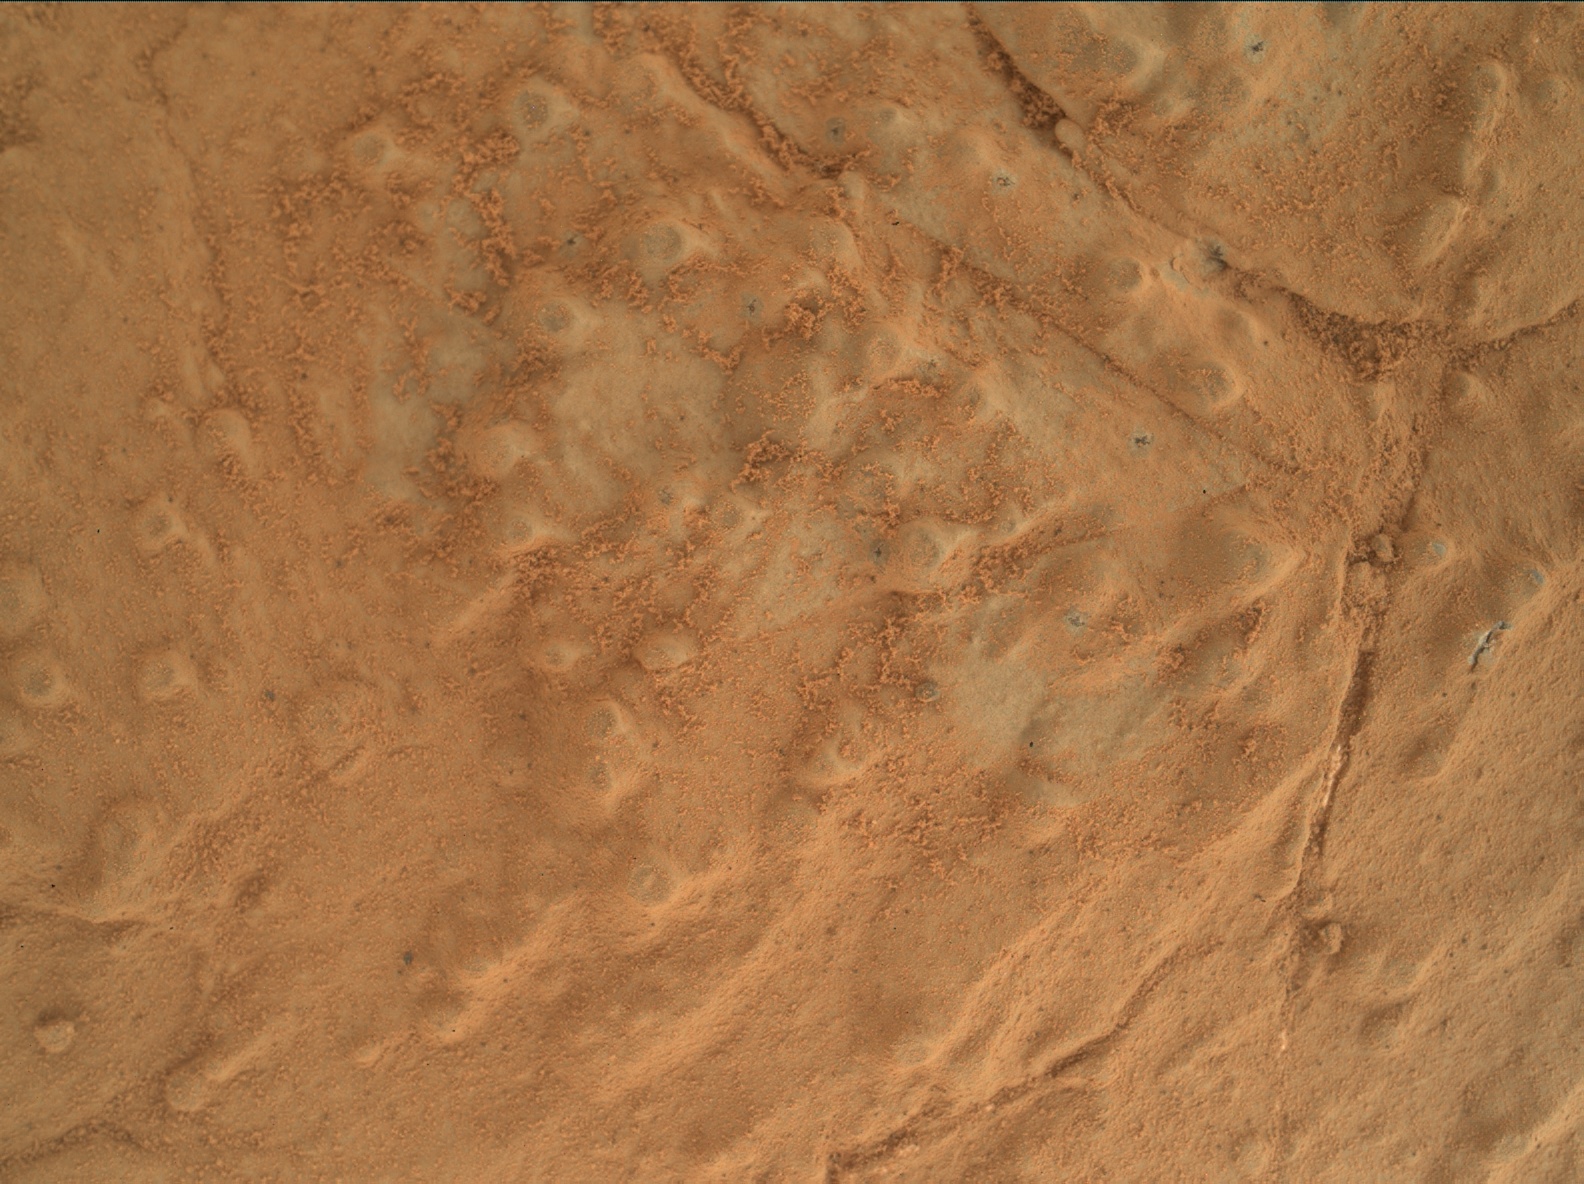 Nasa's Mars rover Curiosity acquired this image using its Mars Hand Lens Imager (MAHLI) on Sol 277